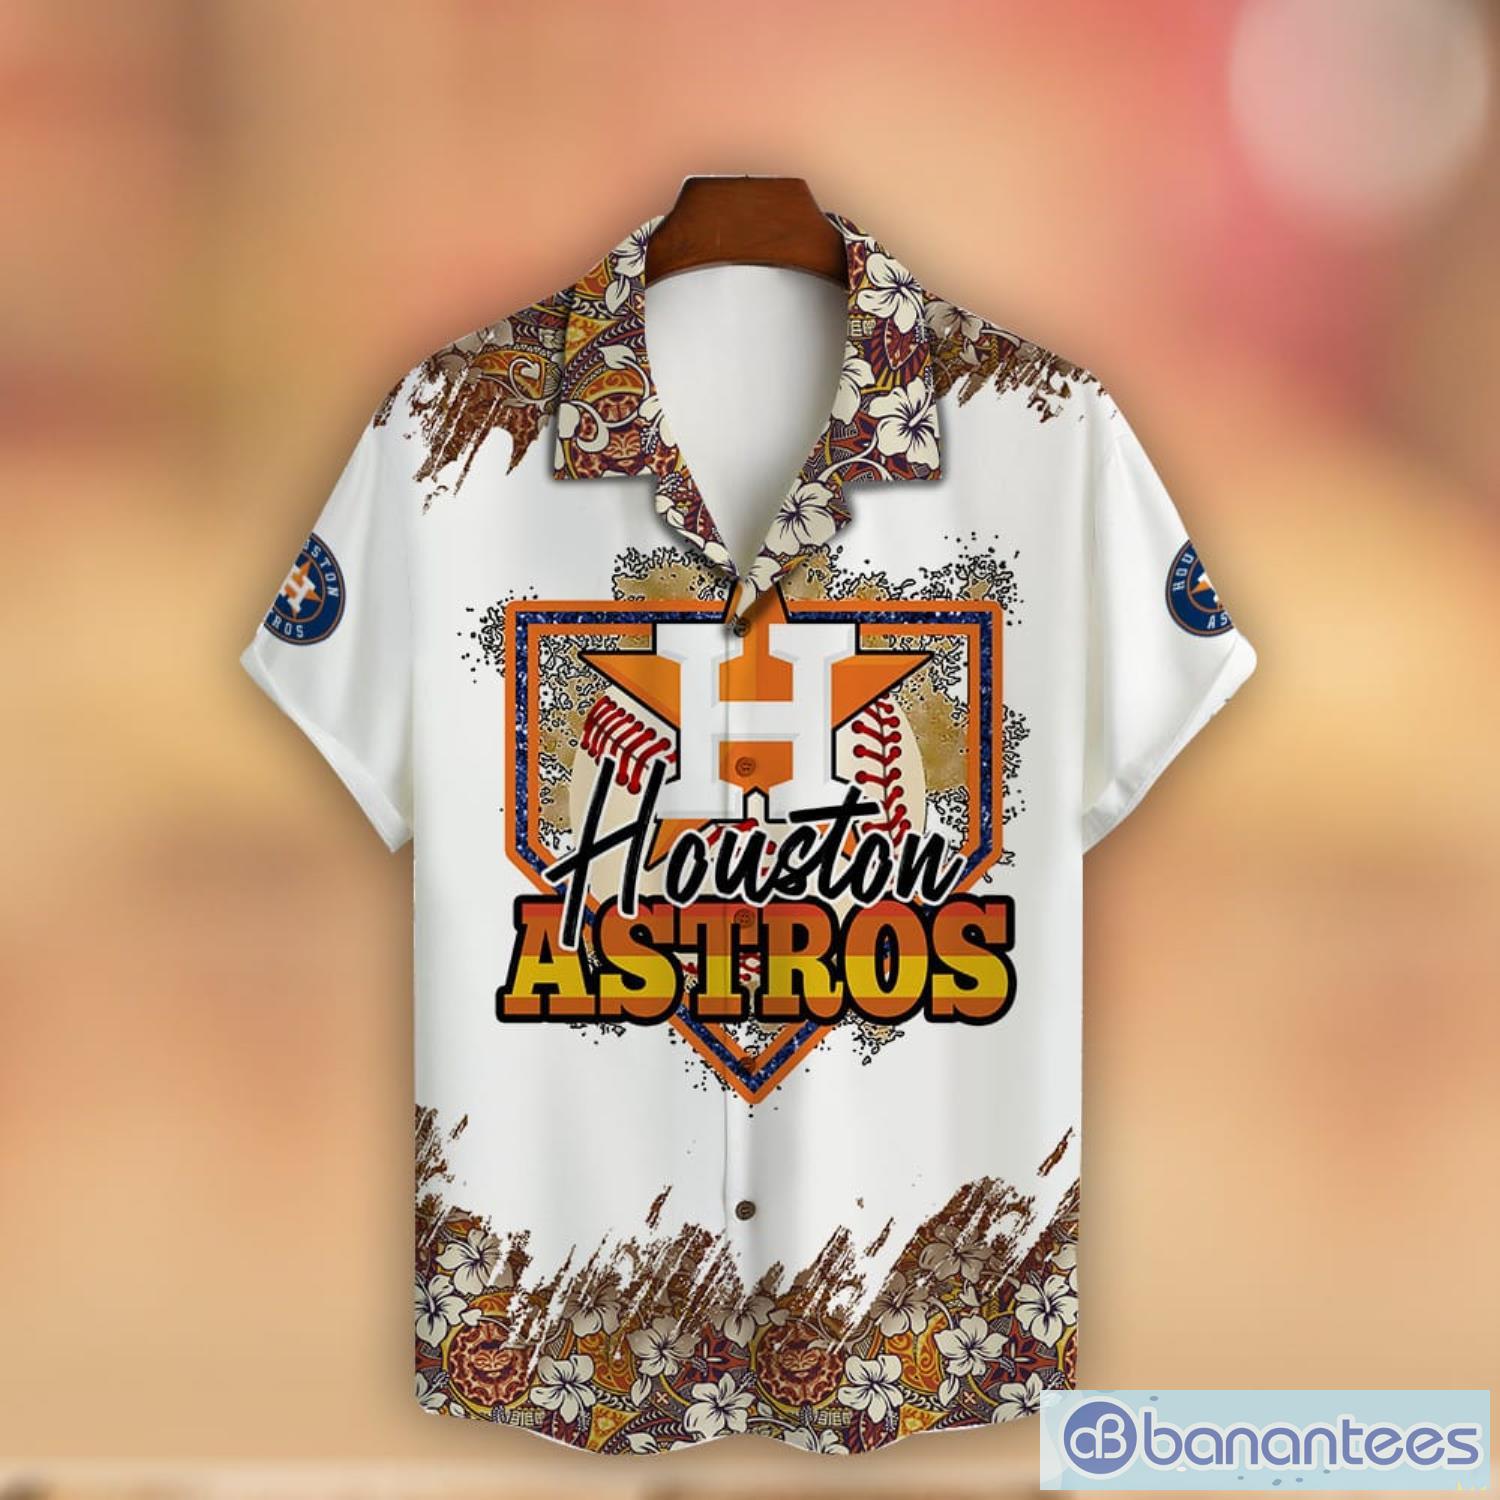 Houston Astros Vintage Shirt, Astros Fan Shirts, Gifts for Houston